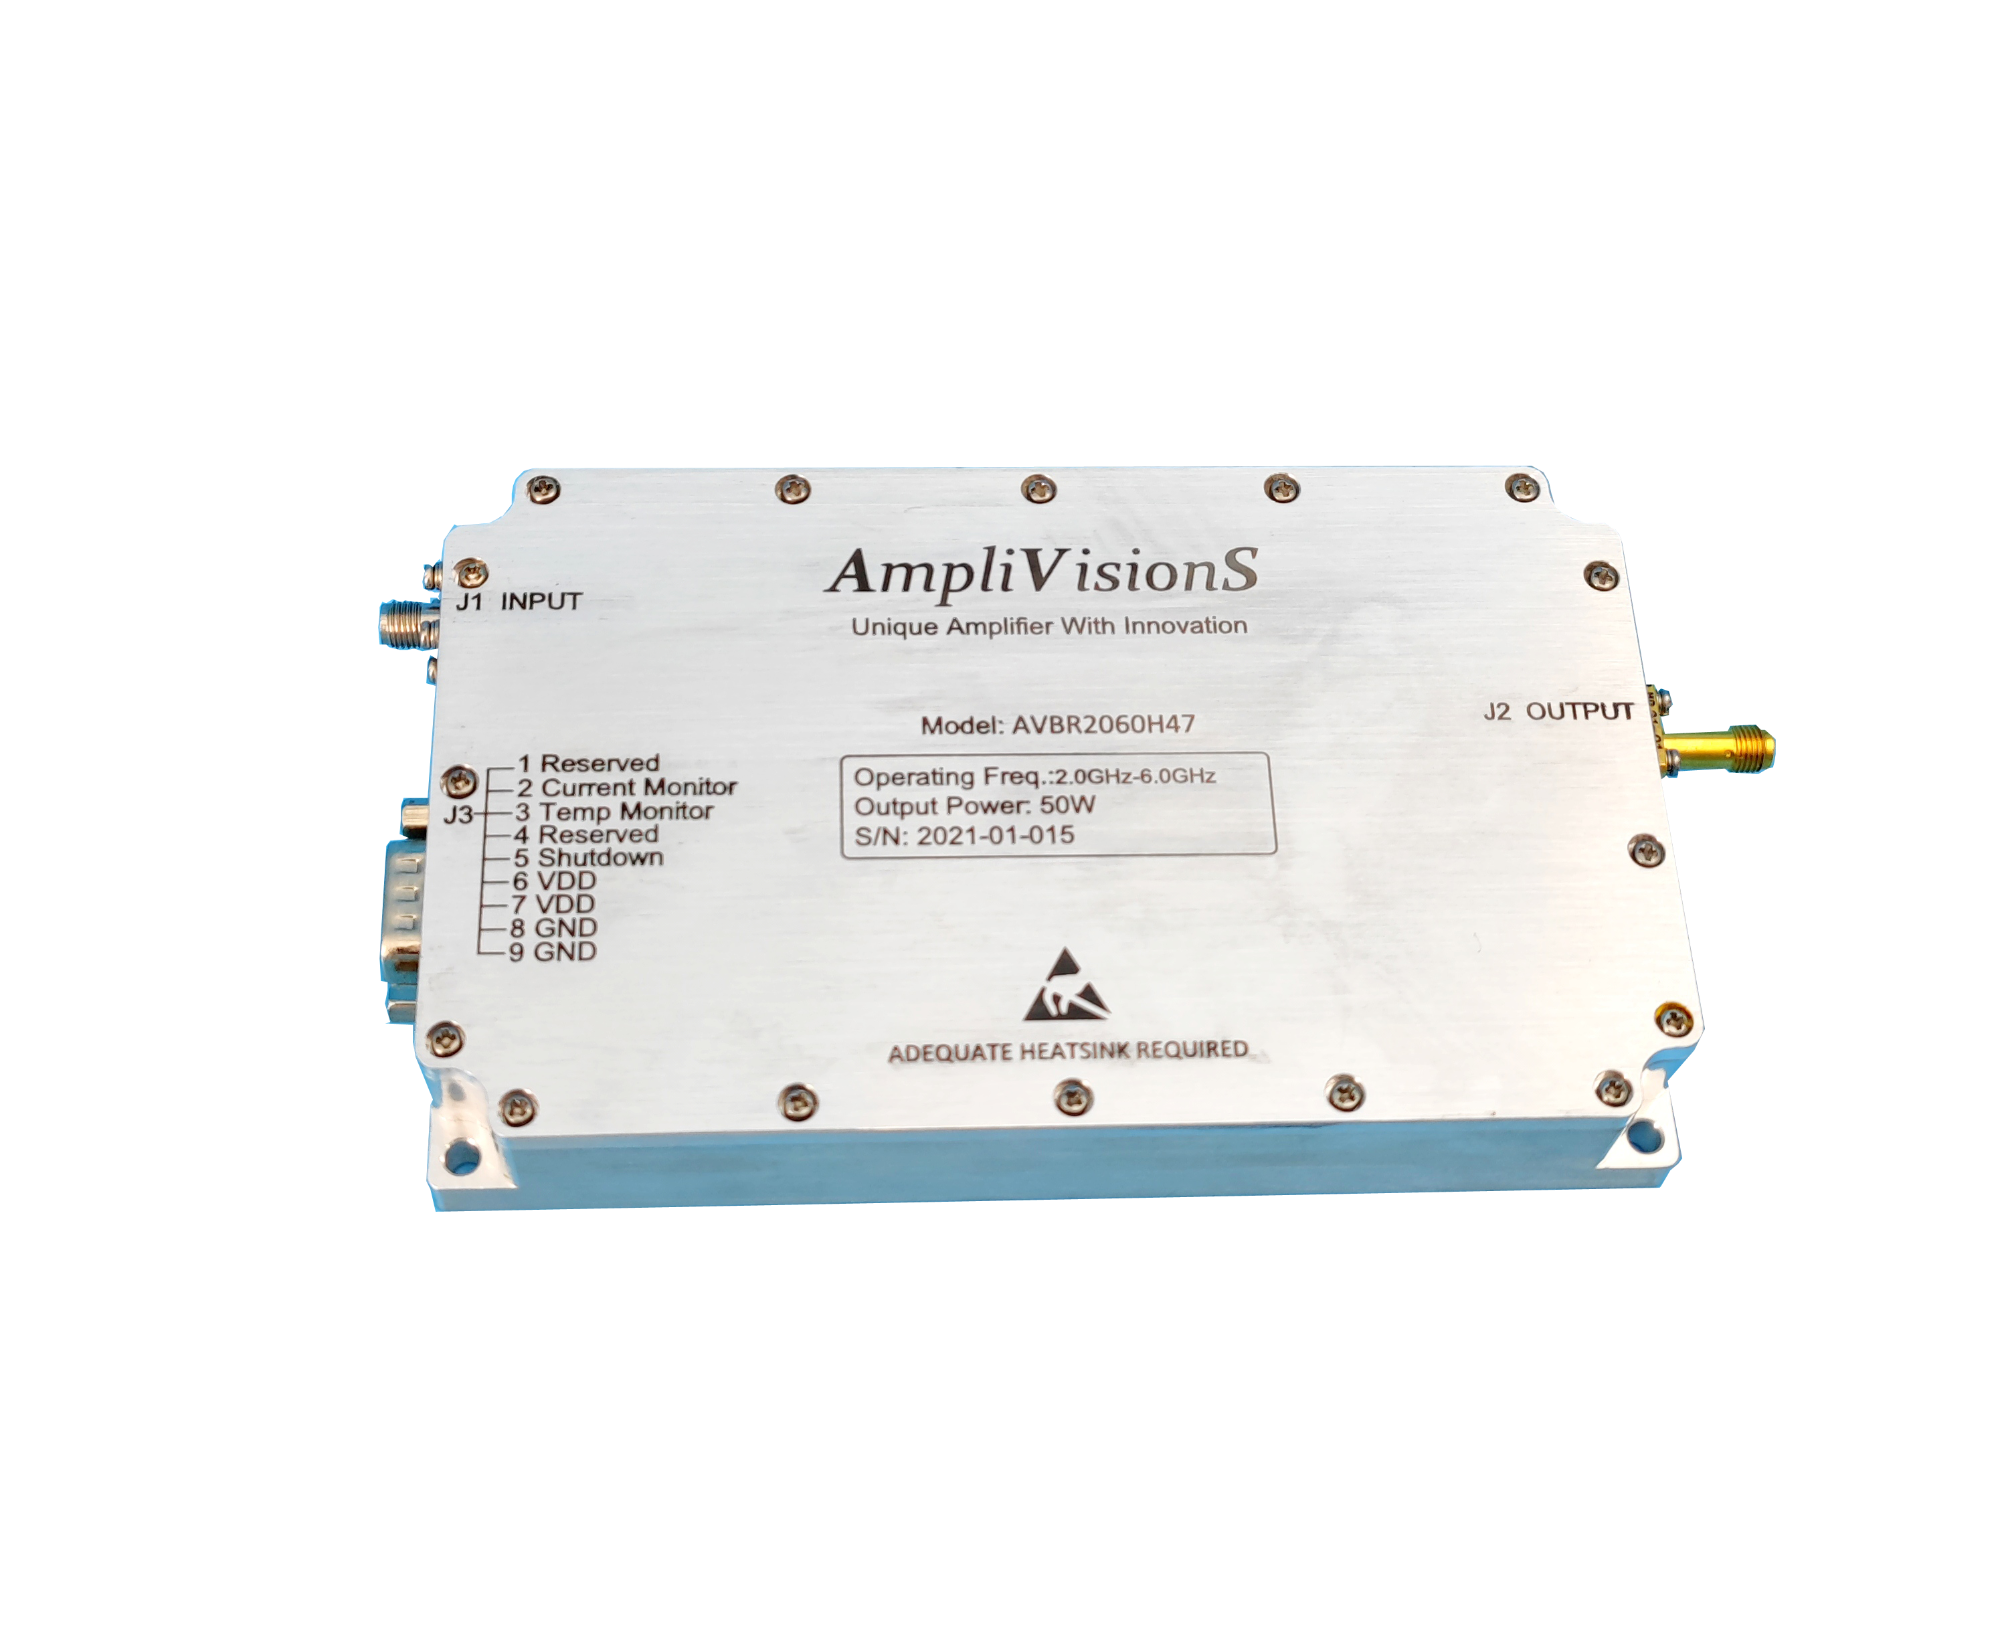 New AmpliVisionS 50 W GaN Solid-State Power Amplifier from 2.0 to 6.0 GHz